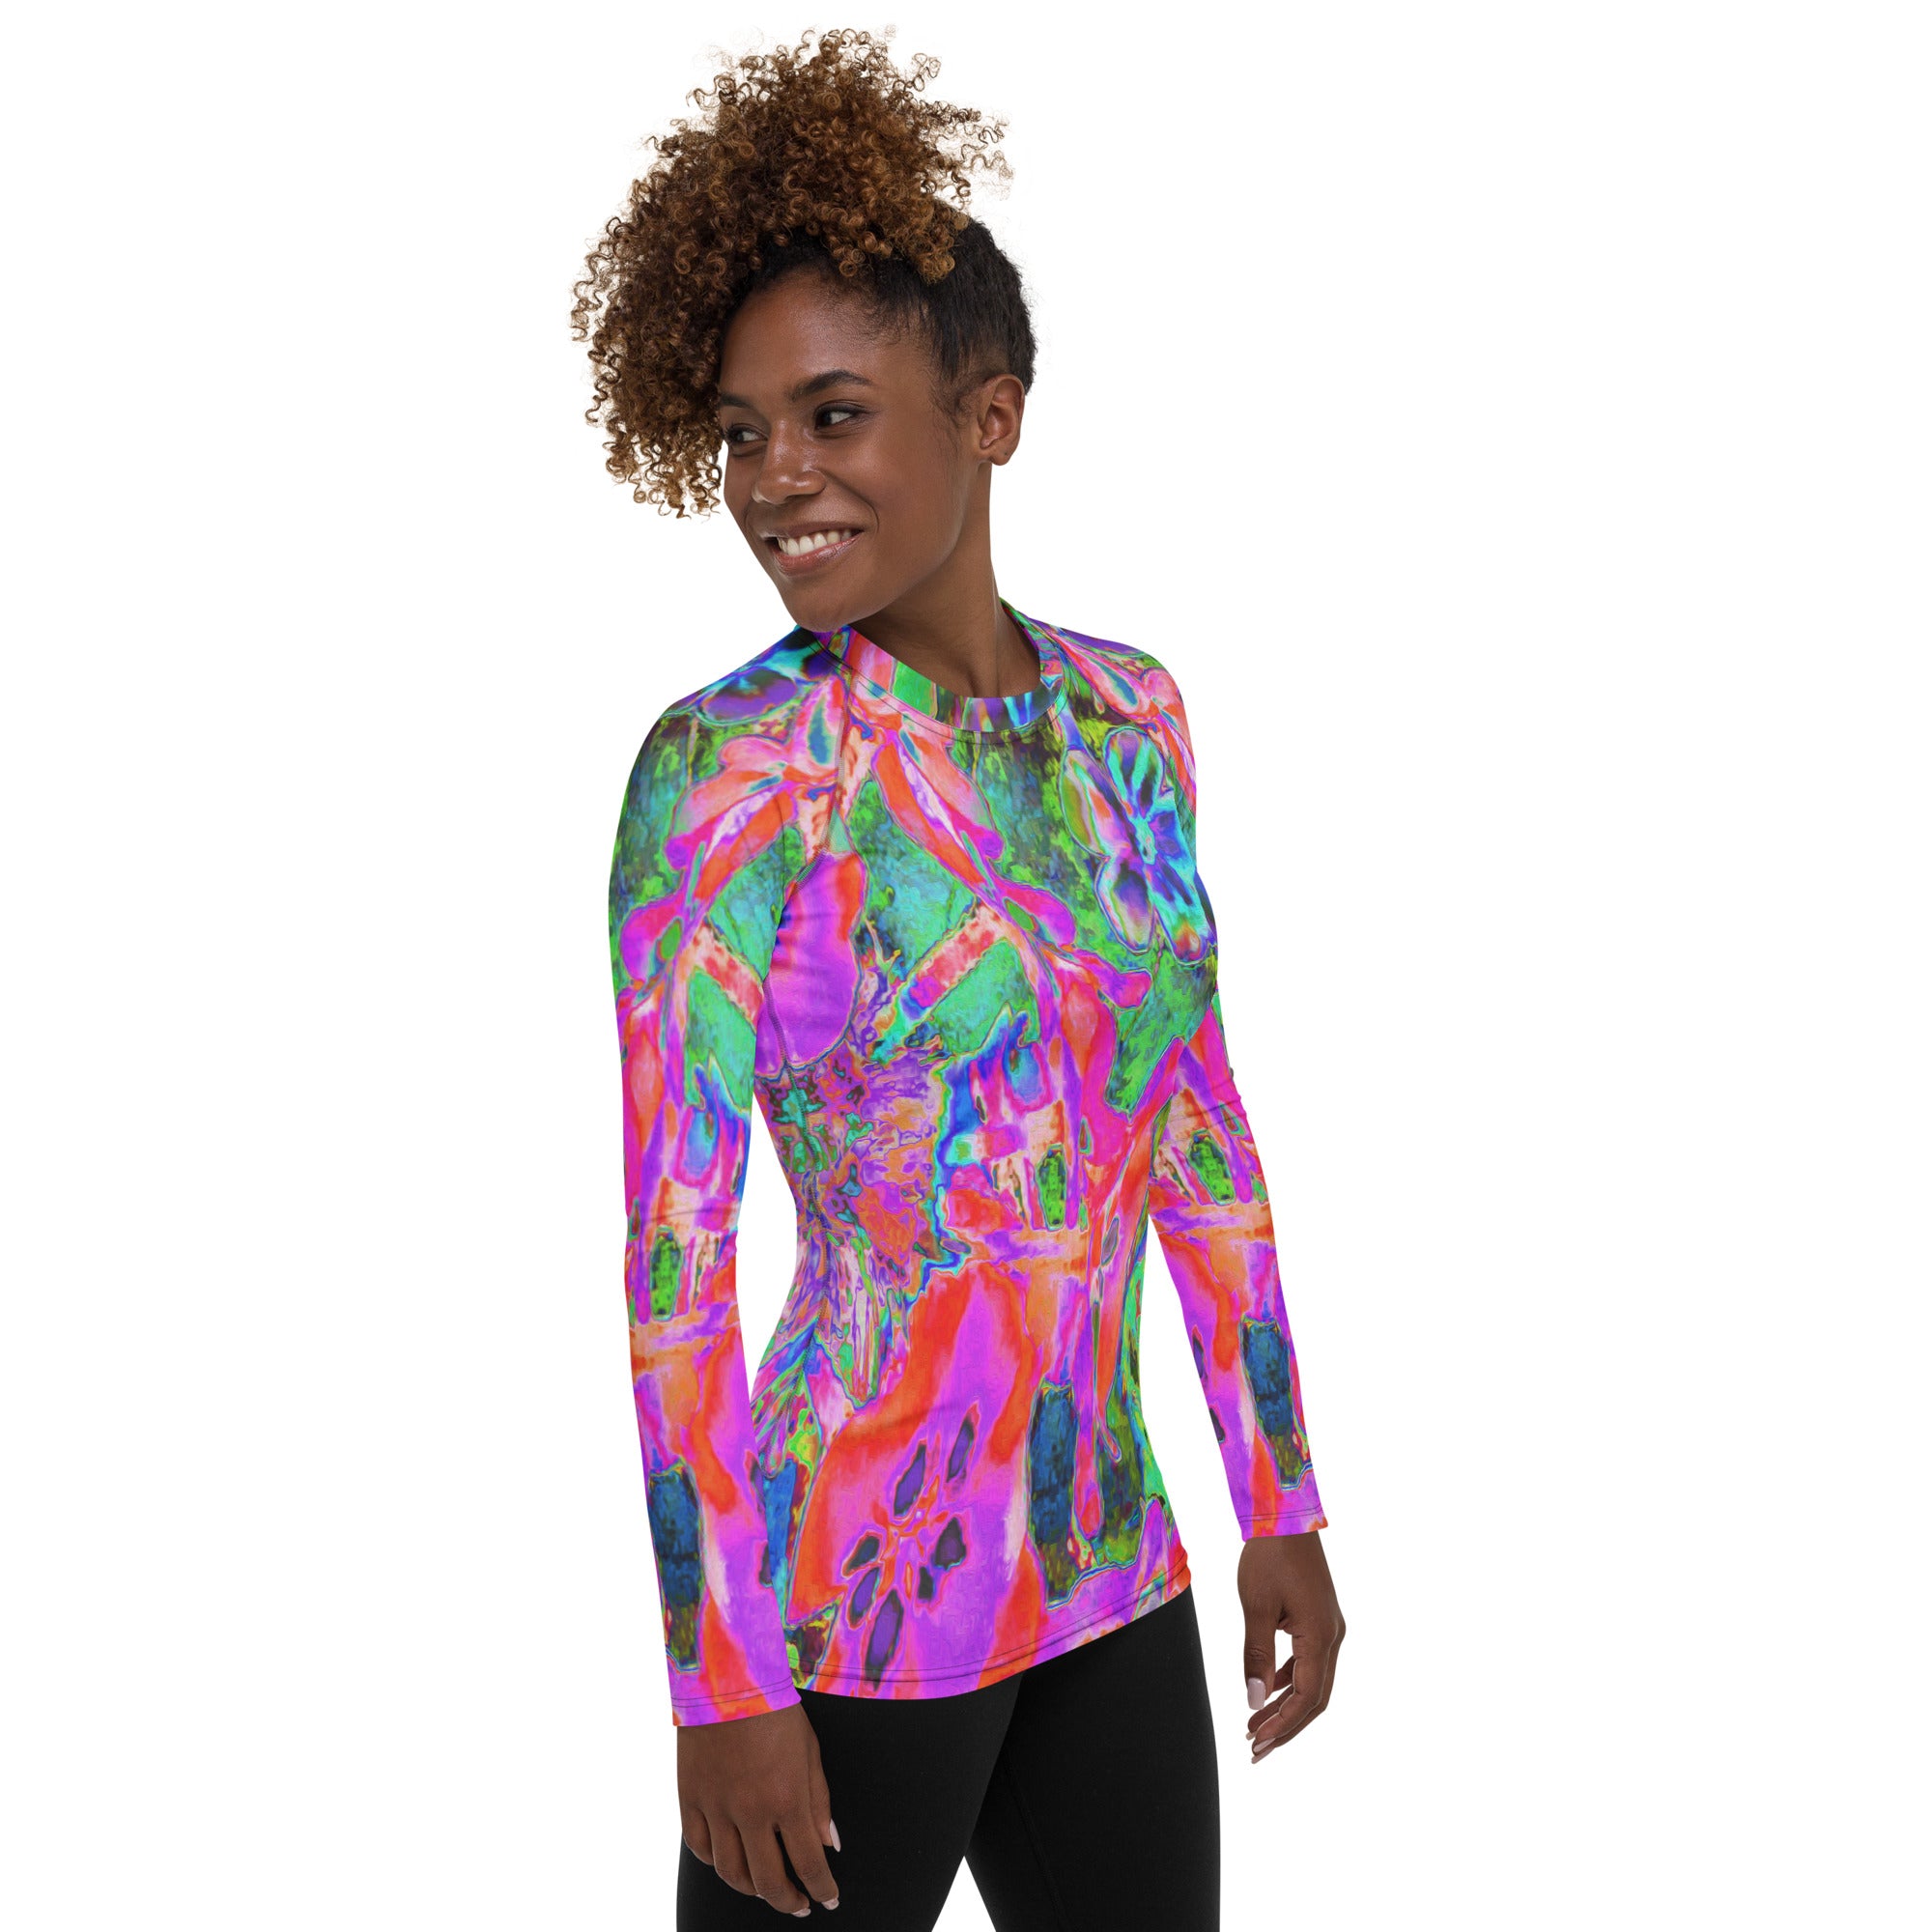 Women's Rash Guard Shirts - Trippy Psychedelic Hot Pink and Purple Flowers